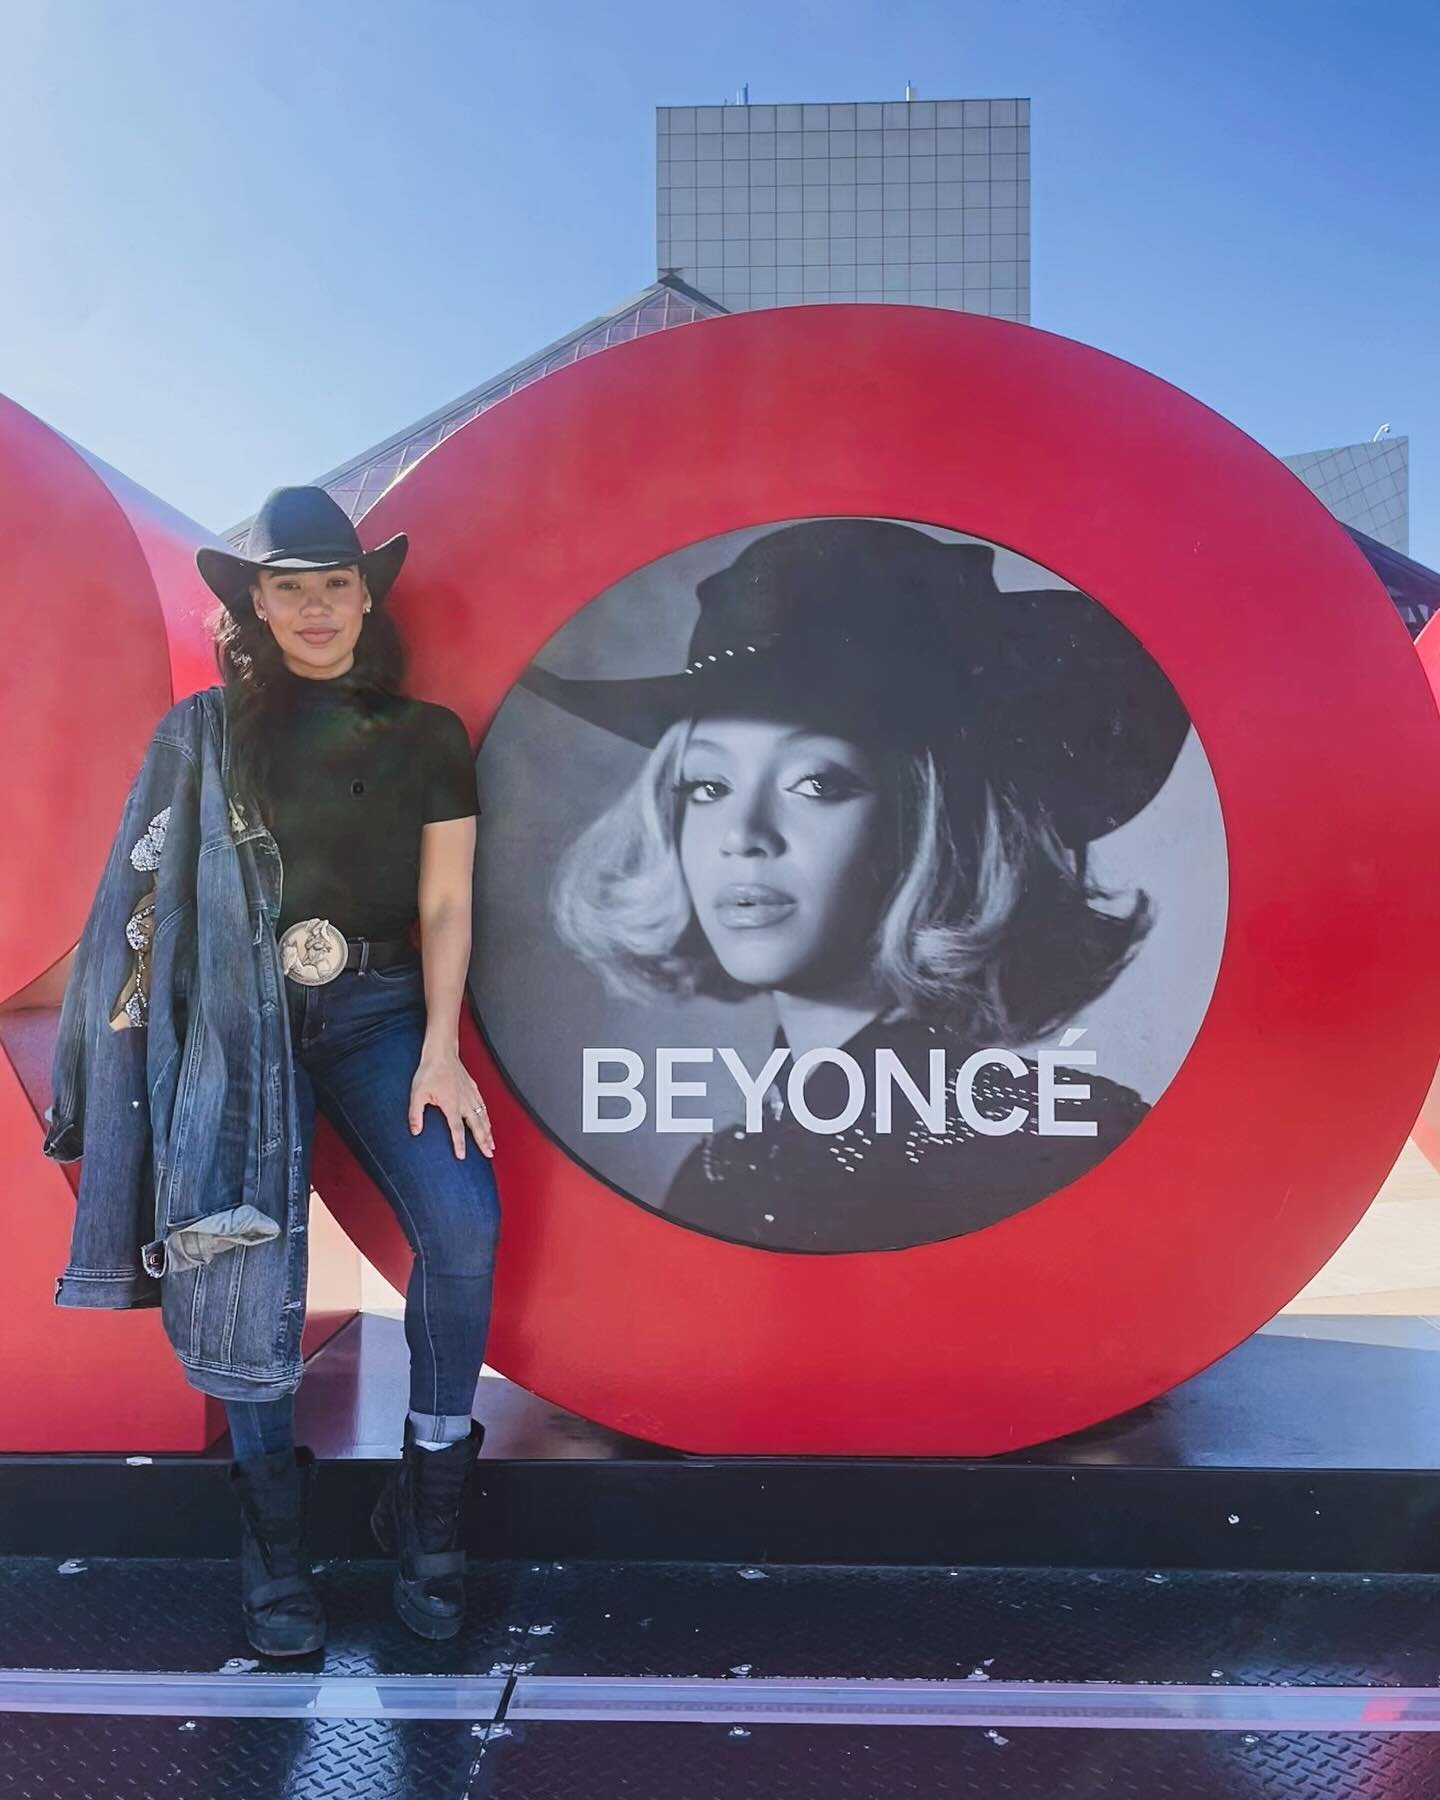 Beyonce said &ldquo;Let there be country&rdquo; and country was now introduced to @beyonce The staff at the @rockhall were great host for&rdquo;Beyonce Day&rdquo; in celebration of the release of act 2 &ldquo; COWBOY CARTER&rdquo;. DJ @djredibeats di